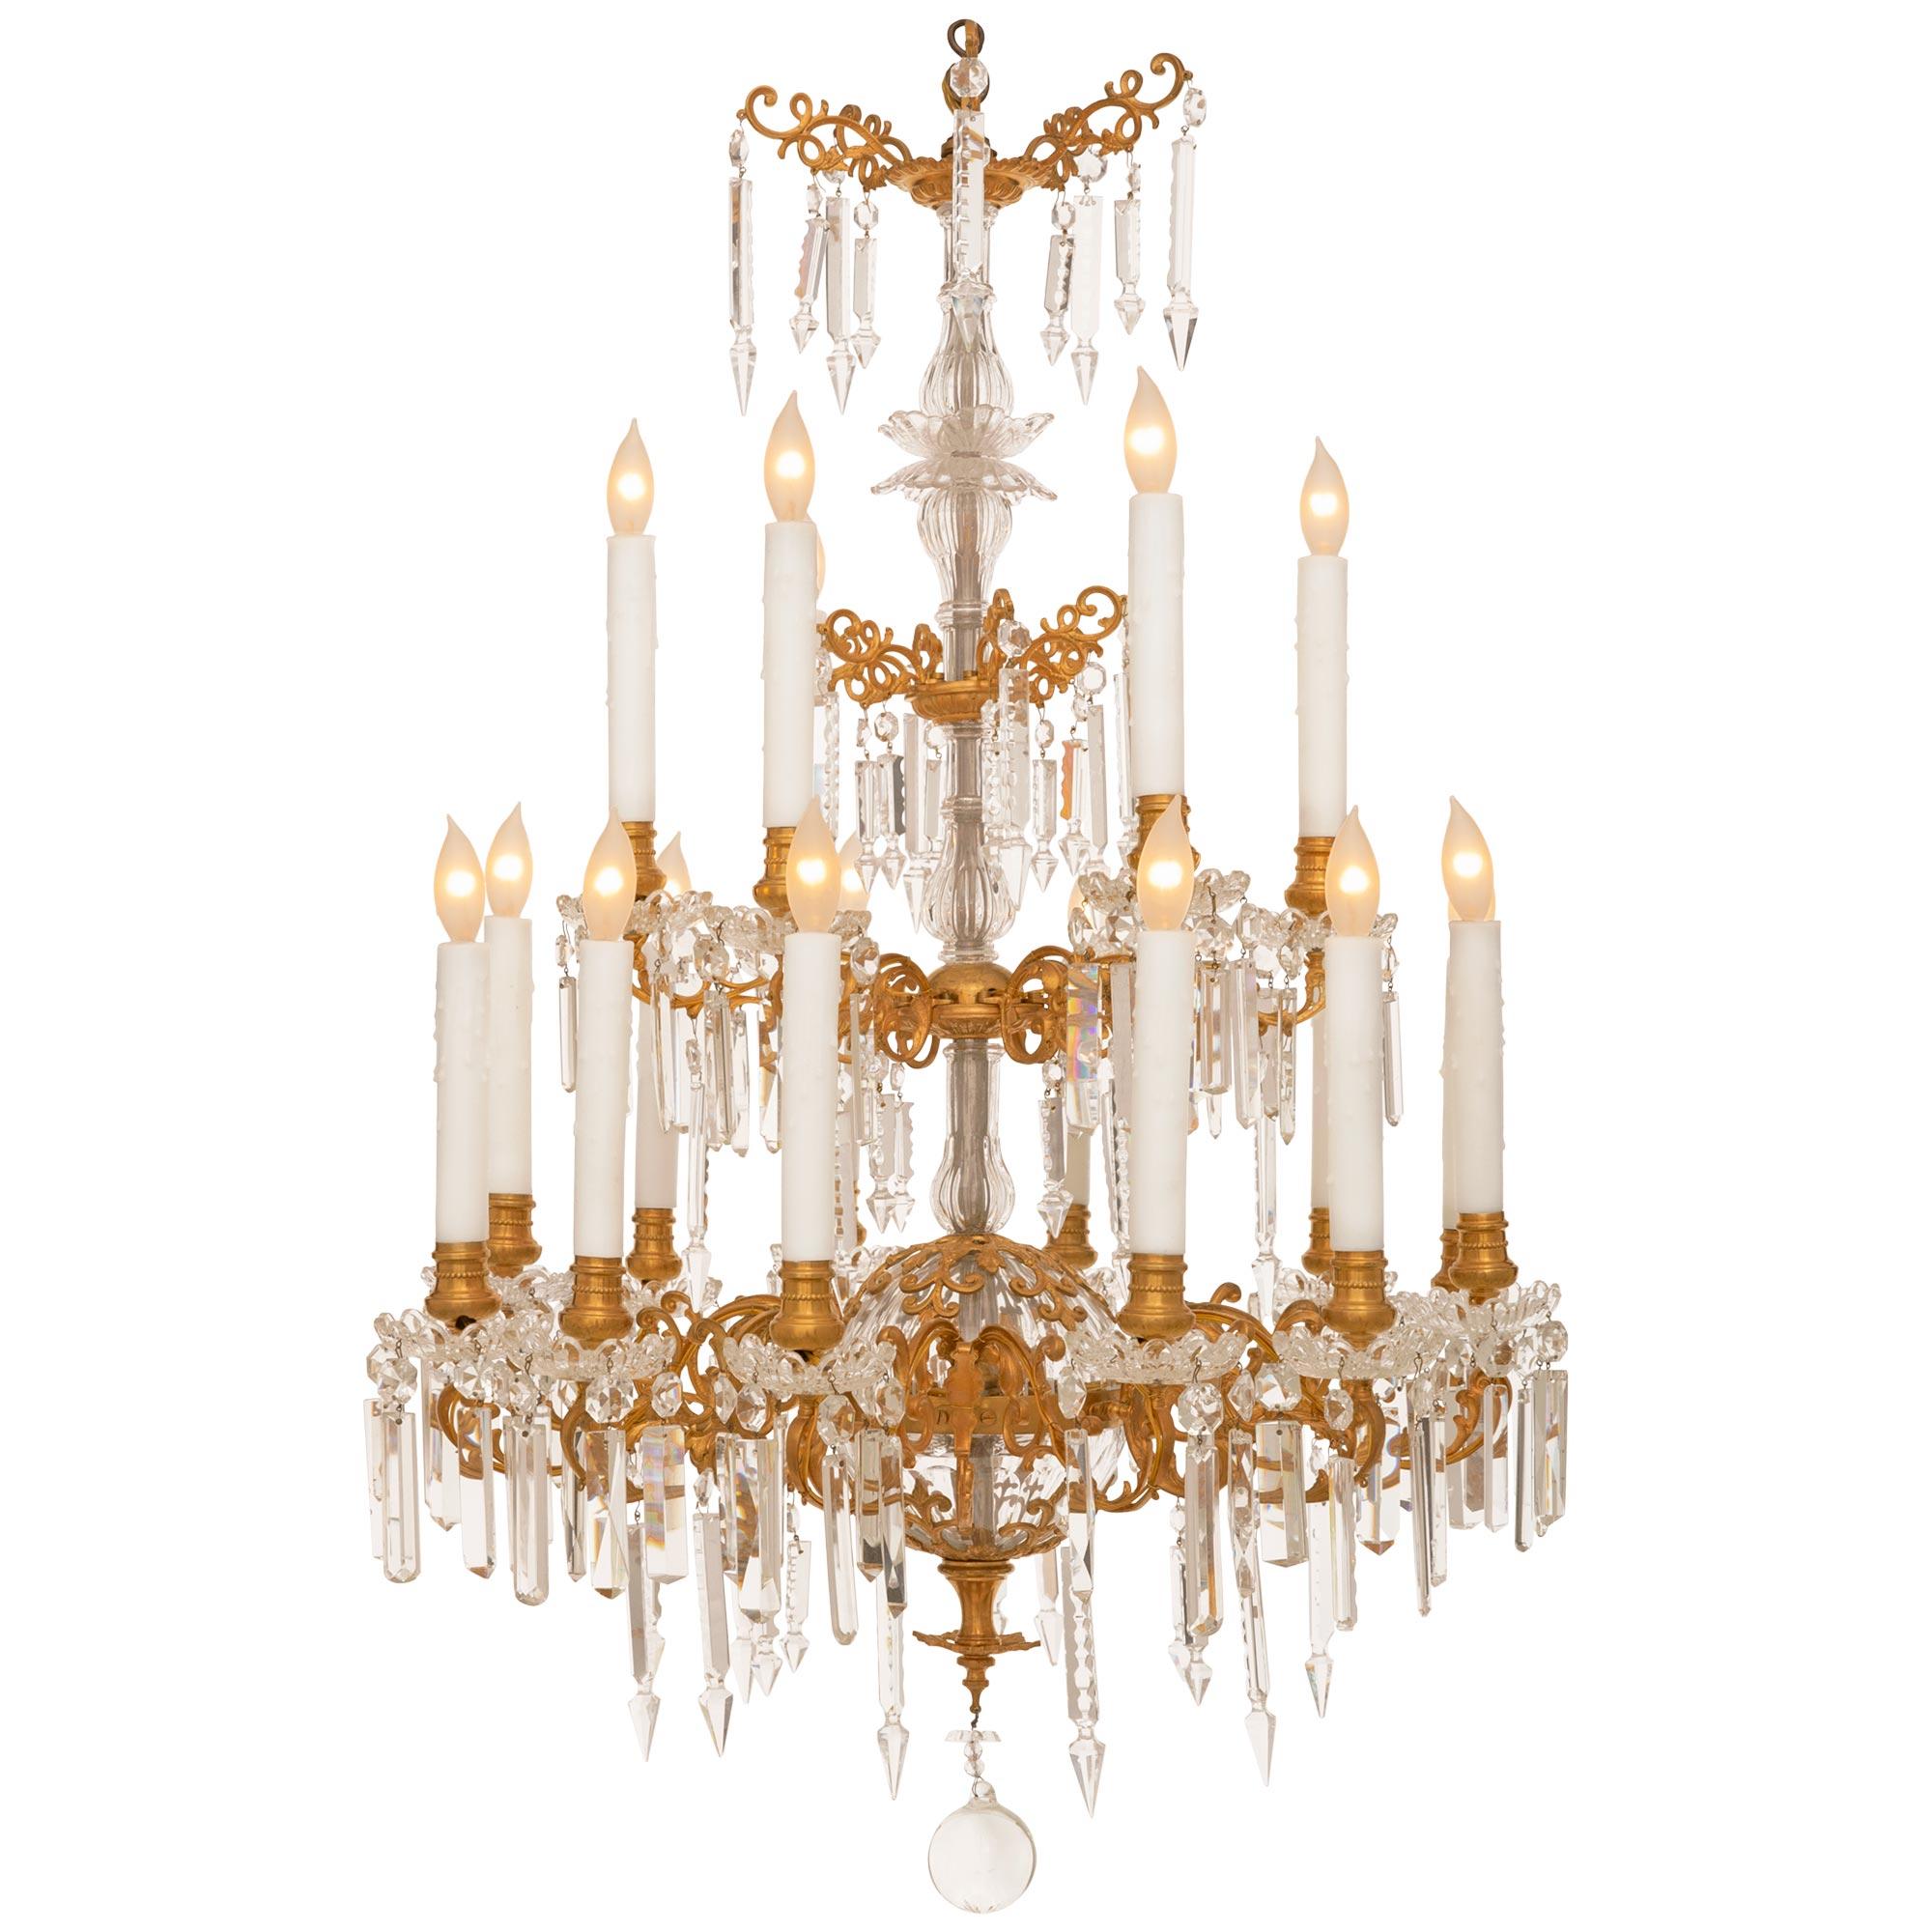 French 19th Century Louis XVI Style Baccarat Crystal and Ormolu Chandelier In Good Condition For Sale In West Palm Beach, FL